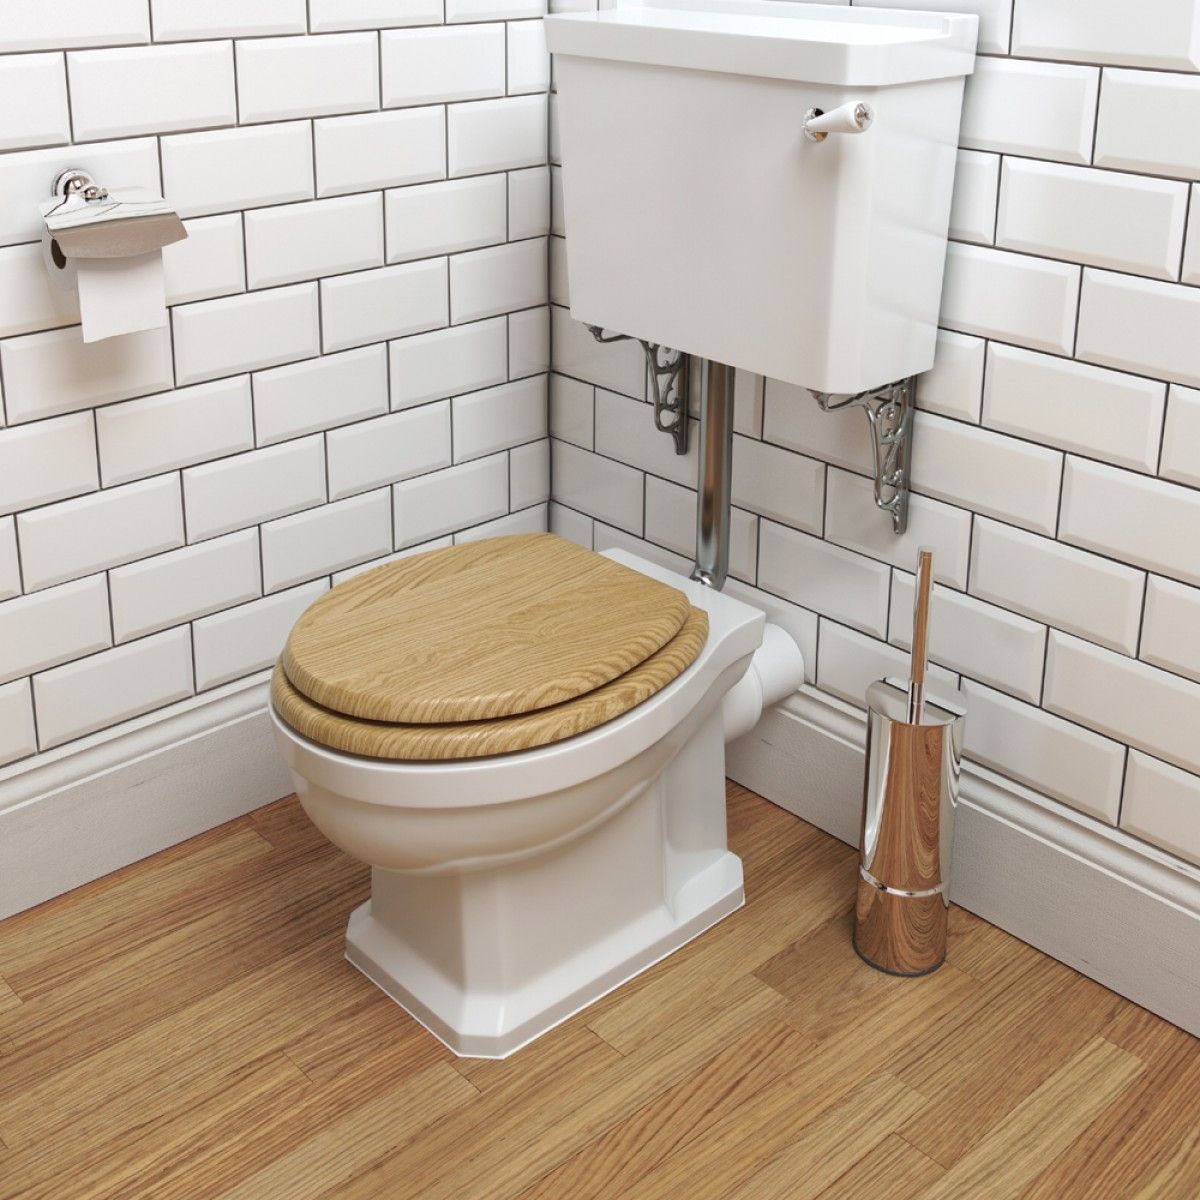 How To Level A Toilet